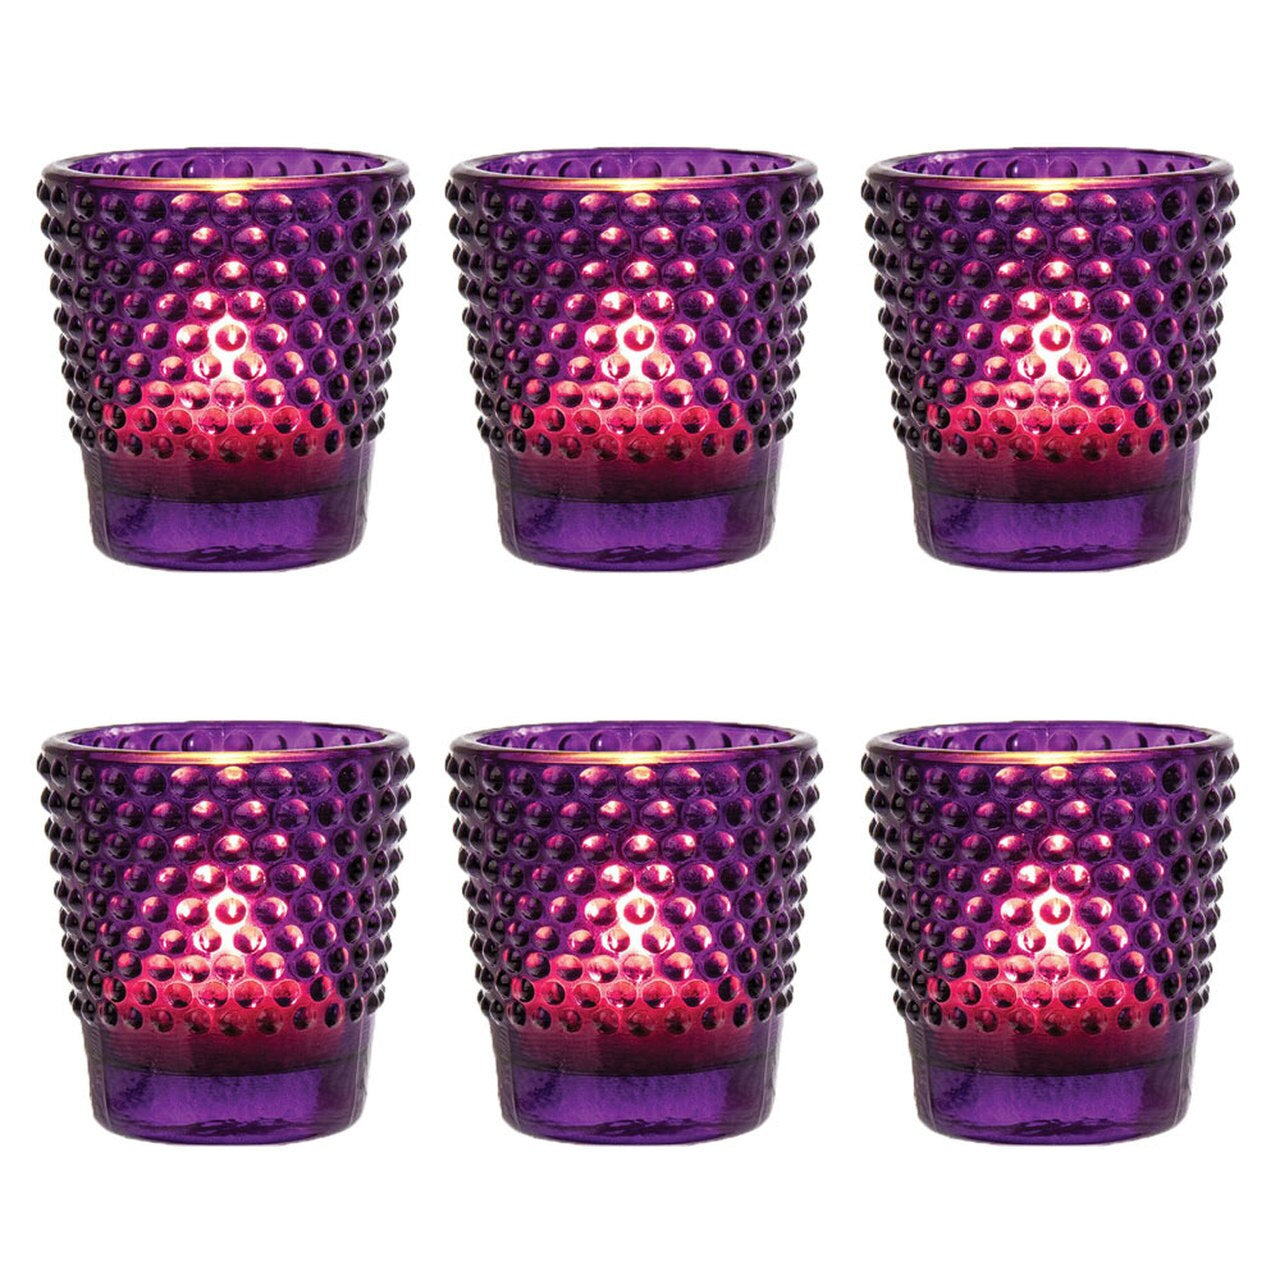 6 Pack | Vintage Hobnail Glass Candle Holder (2.25-Inches, Candace Design, Royal Purple) - For Use with Tea Lights - For Home Decor, Parties and Wedding Decorations - PaperLanternStore.com - Paper Lanterns, Decor, Party Lights & More